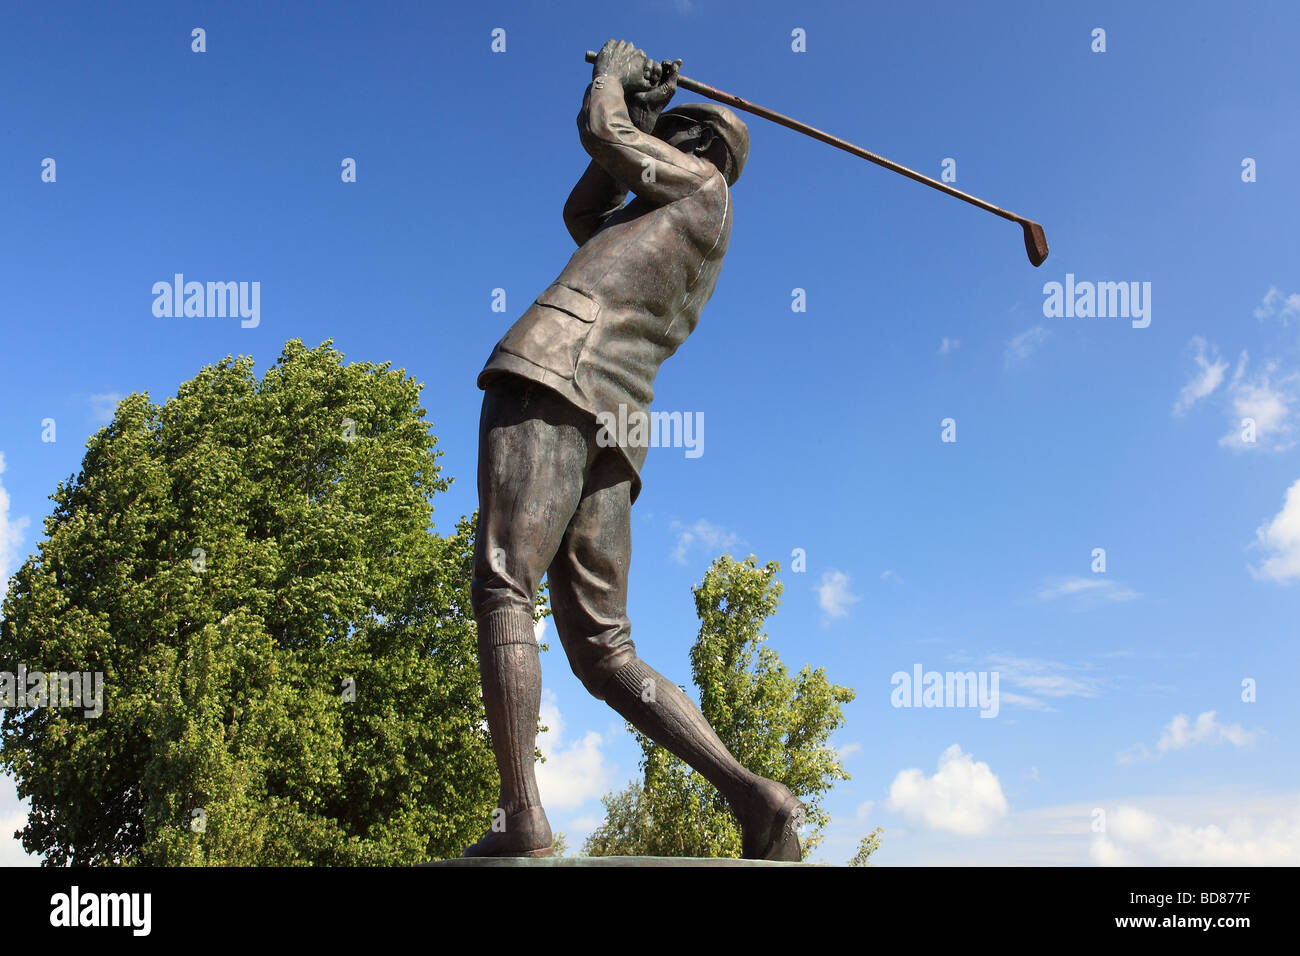 Harry Vardon Statue Royal Jersey Golf Club in Grouville, Jersey Channel Islands Stock Photo